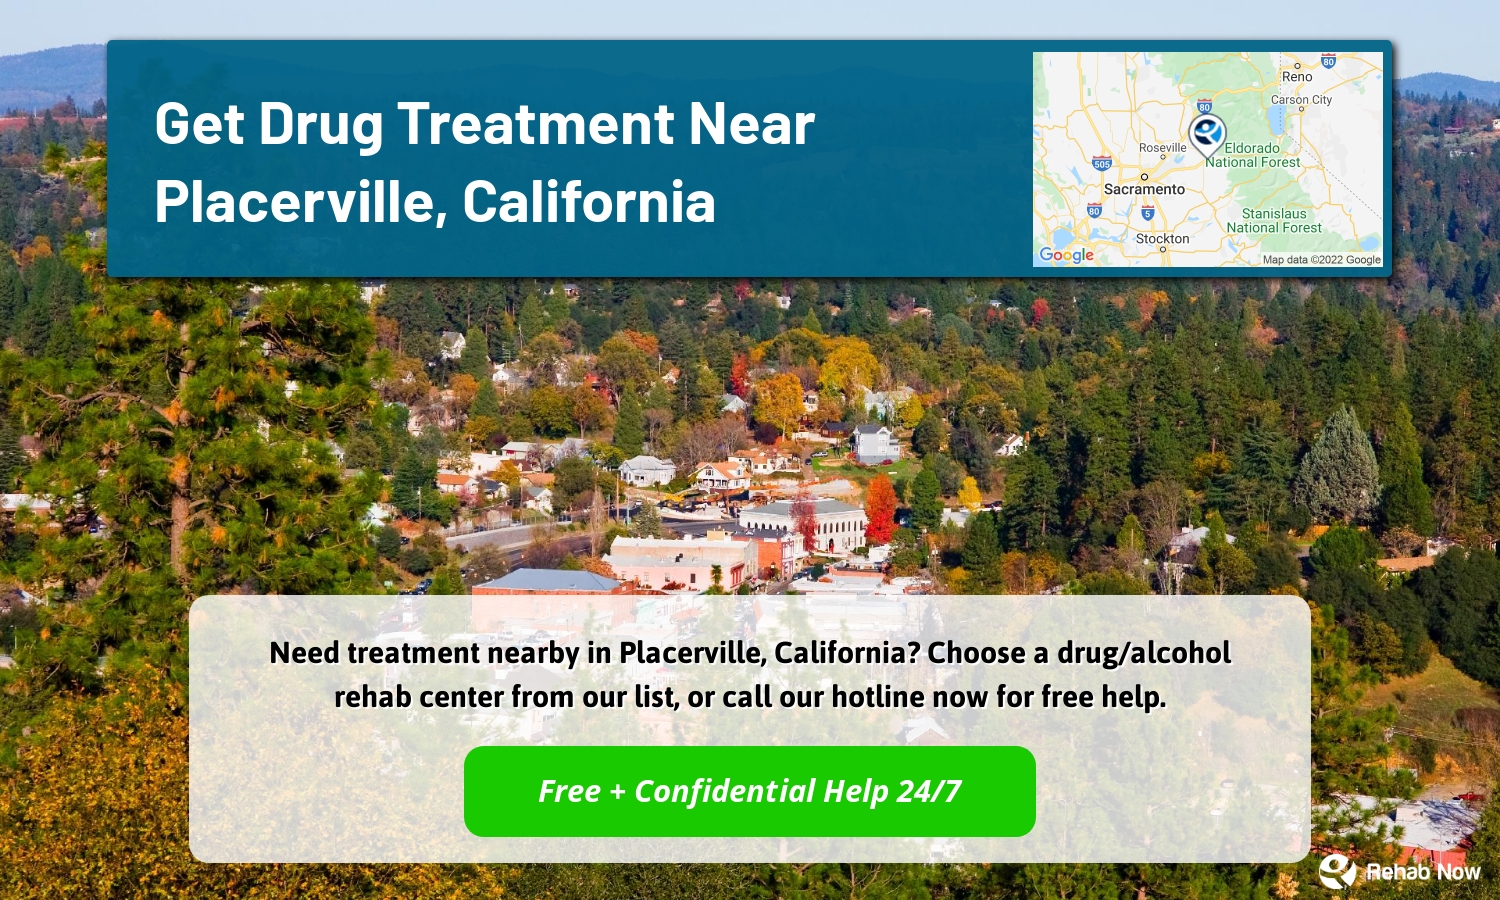 Need treatment nearby in Placerville, California? Choose a drug/alcohol rehab center from our list, or call our hotline now for free help.